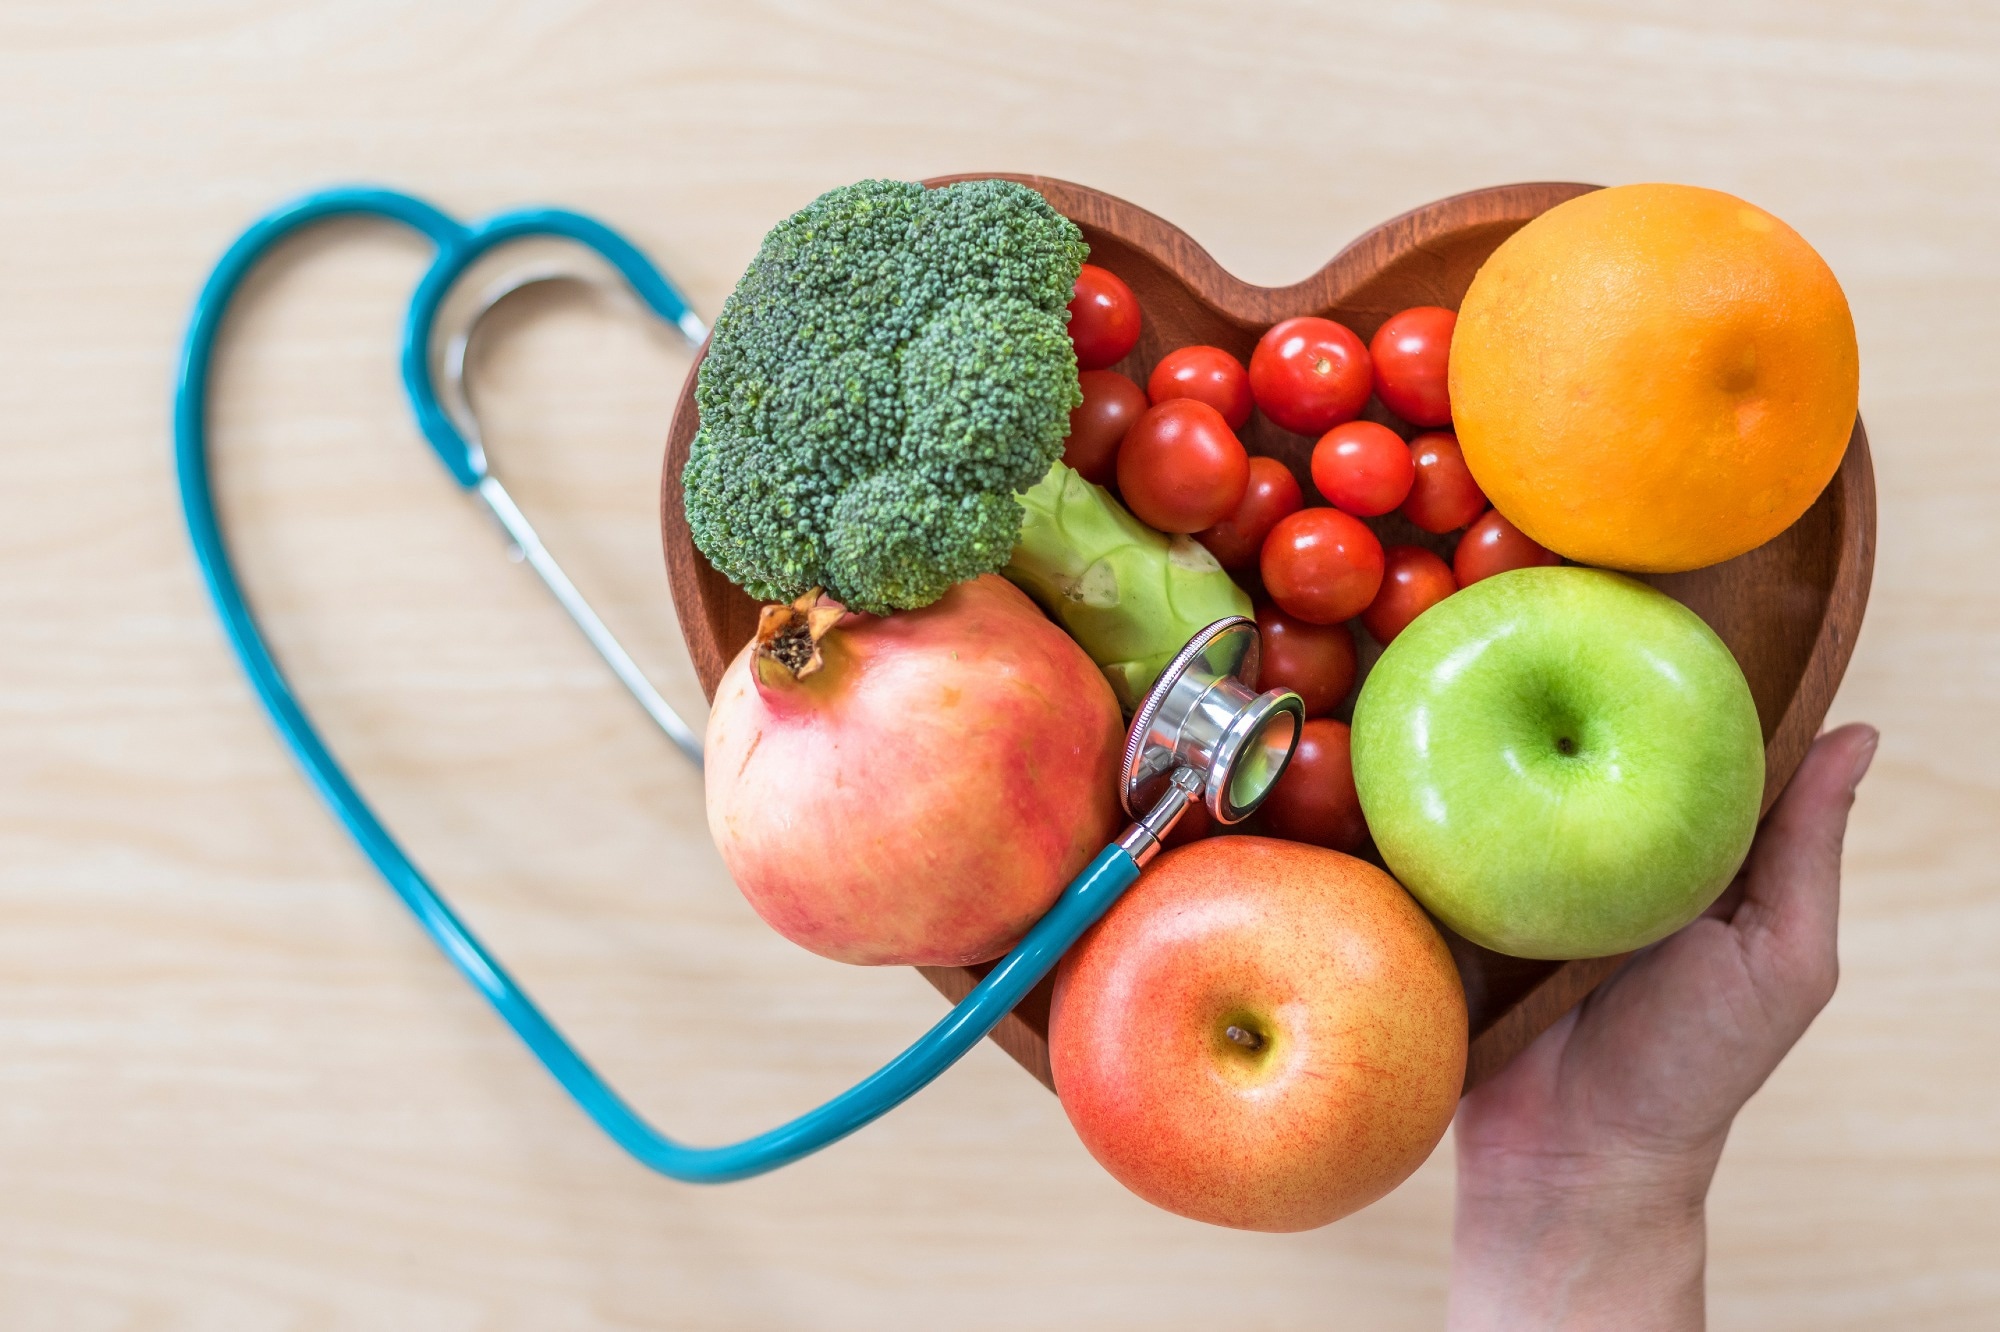 Study: Food security status and cardiometabolic health by sex/gender and race/ethnicity among adults in the United States. Image Credit: Chinnapong/Shutterstock.com